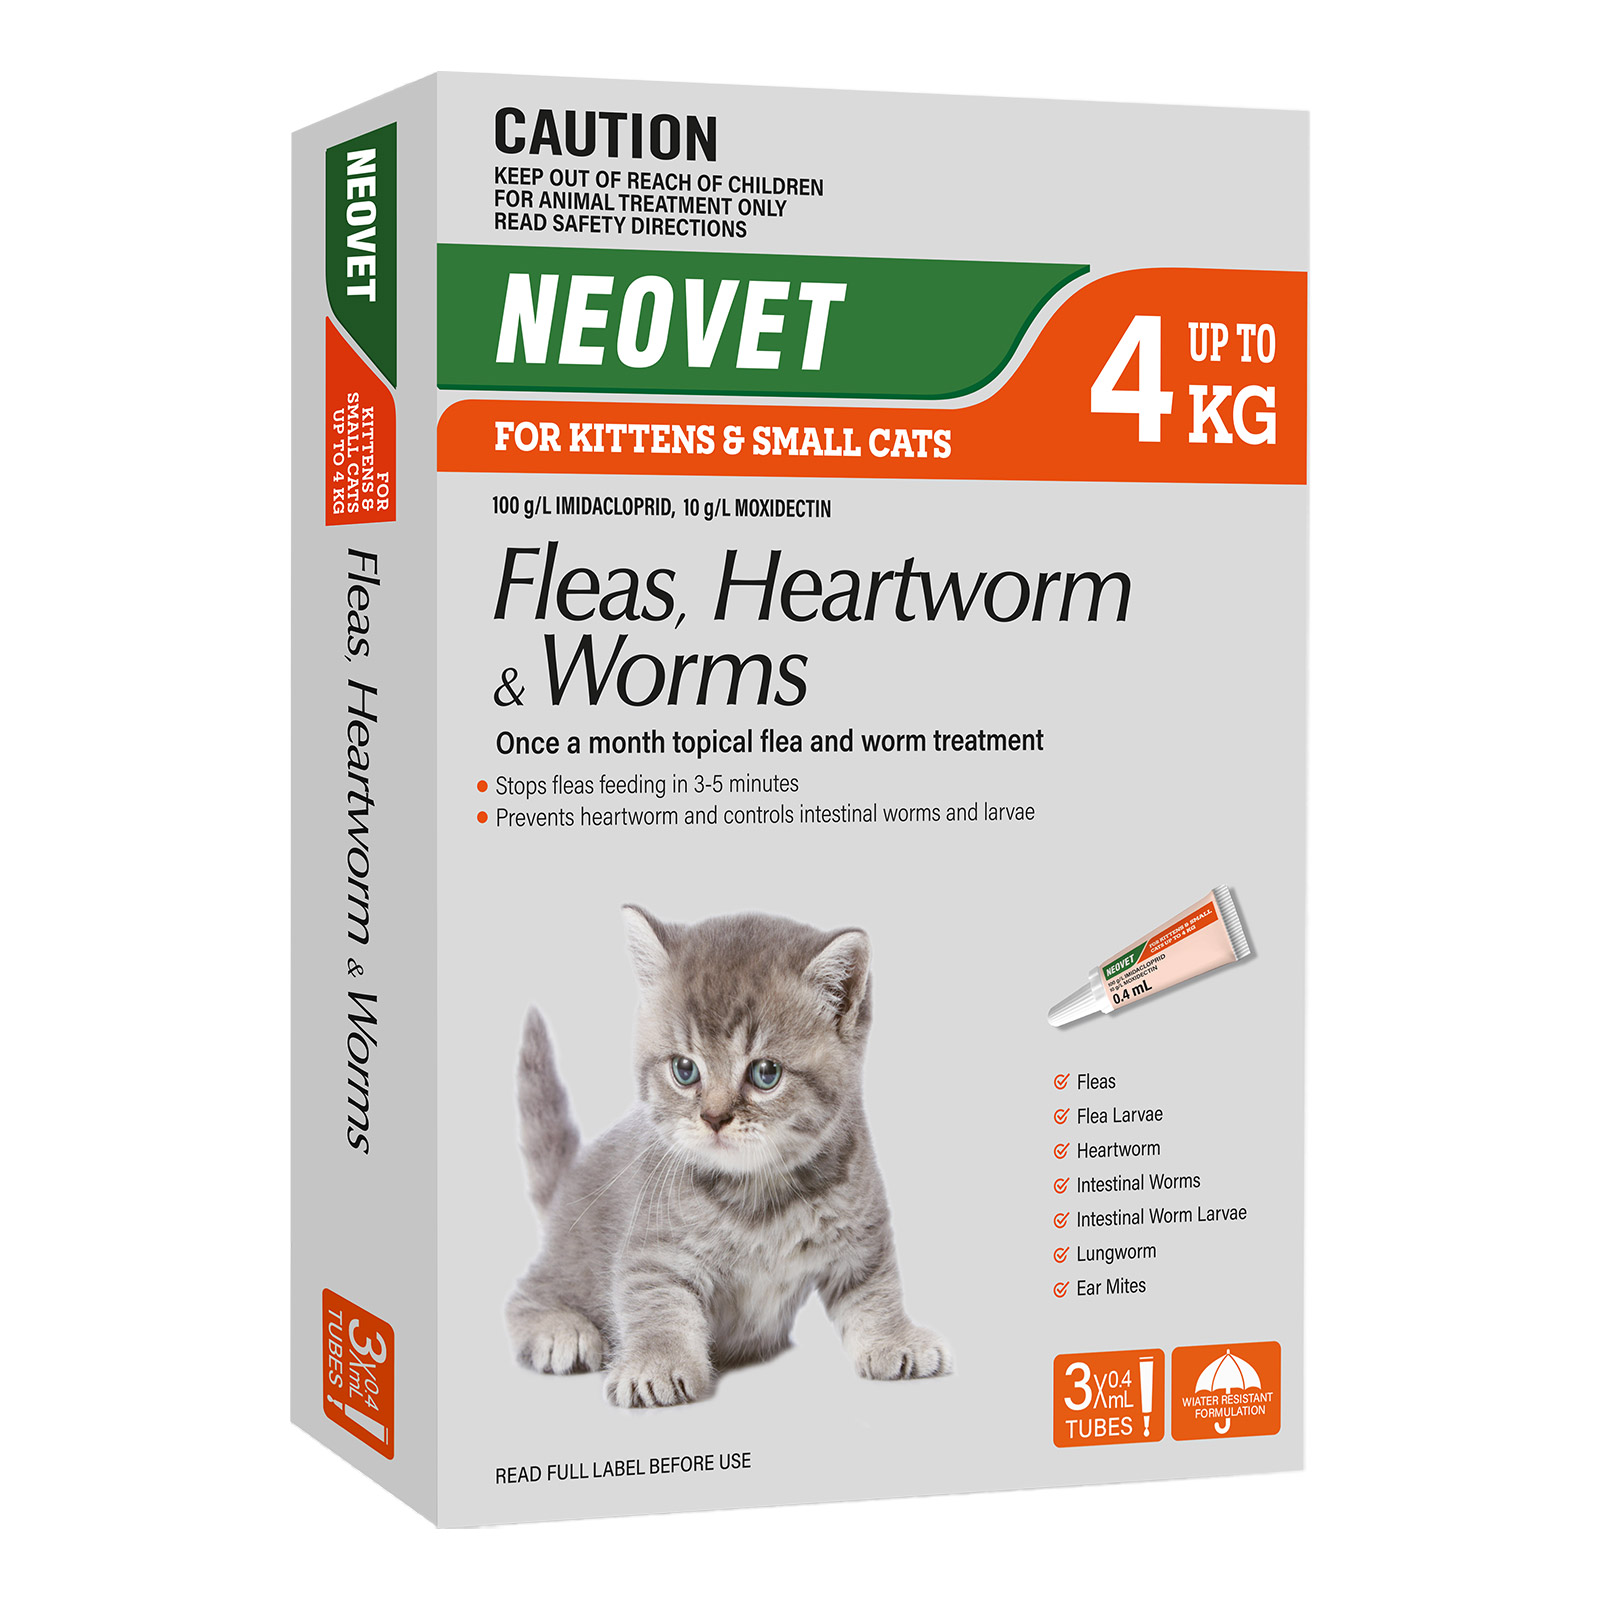 Neovet Flea and Worming for Cats